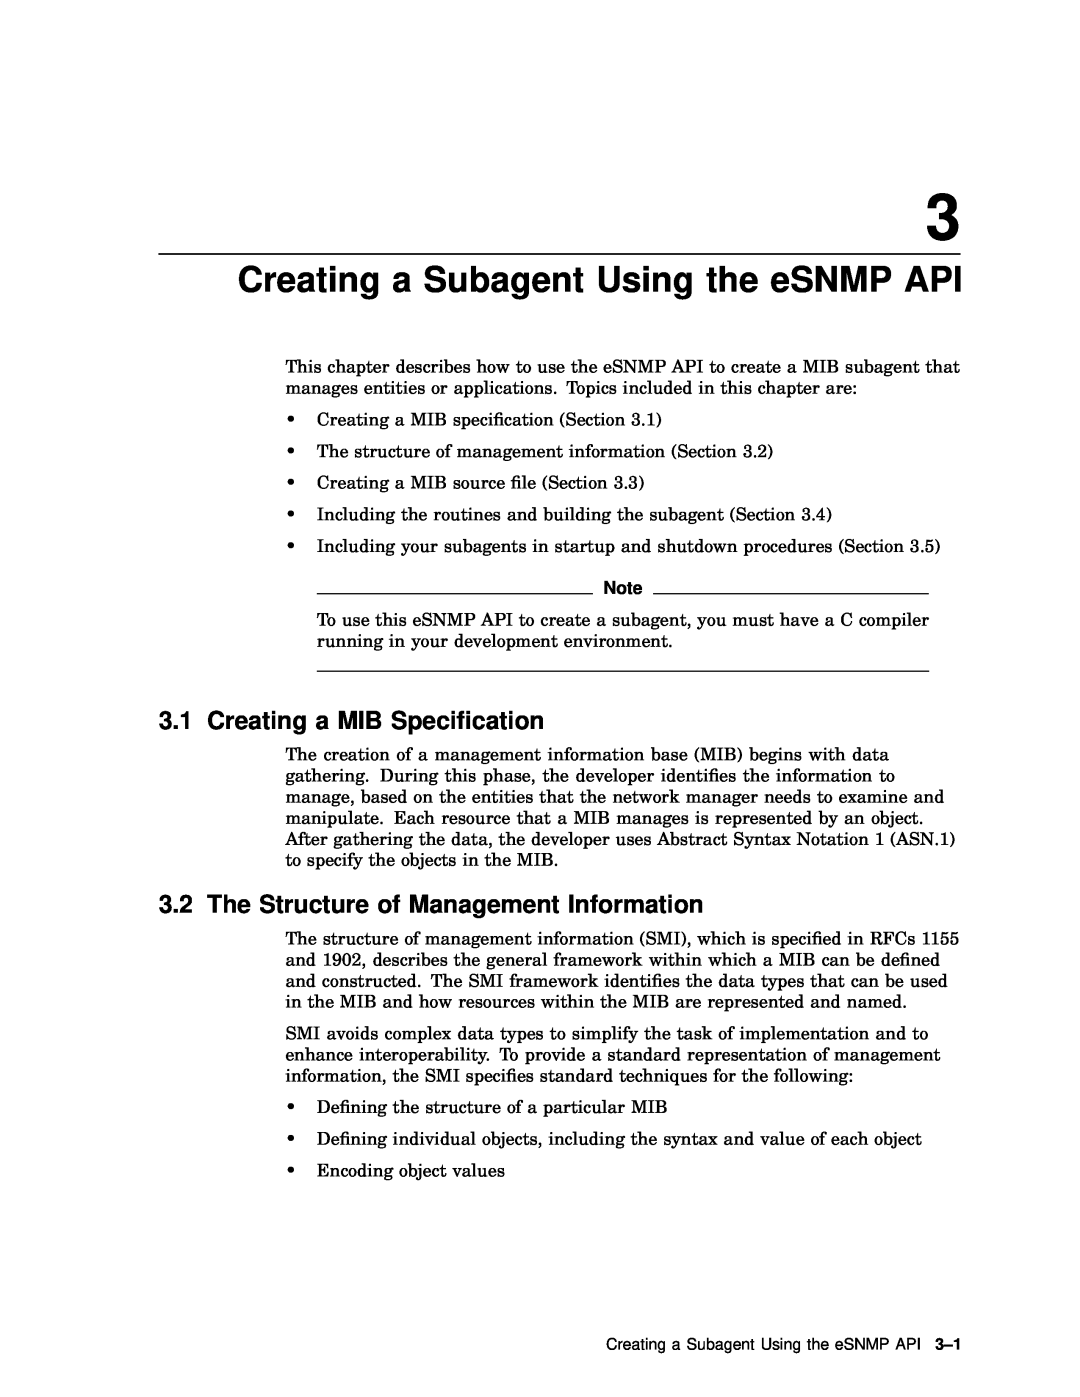 Compaq AAR04BCTE manual Creating a Subagent Using the eSNMP API, Creating a MIB Speciﬁcation 